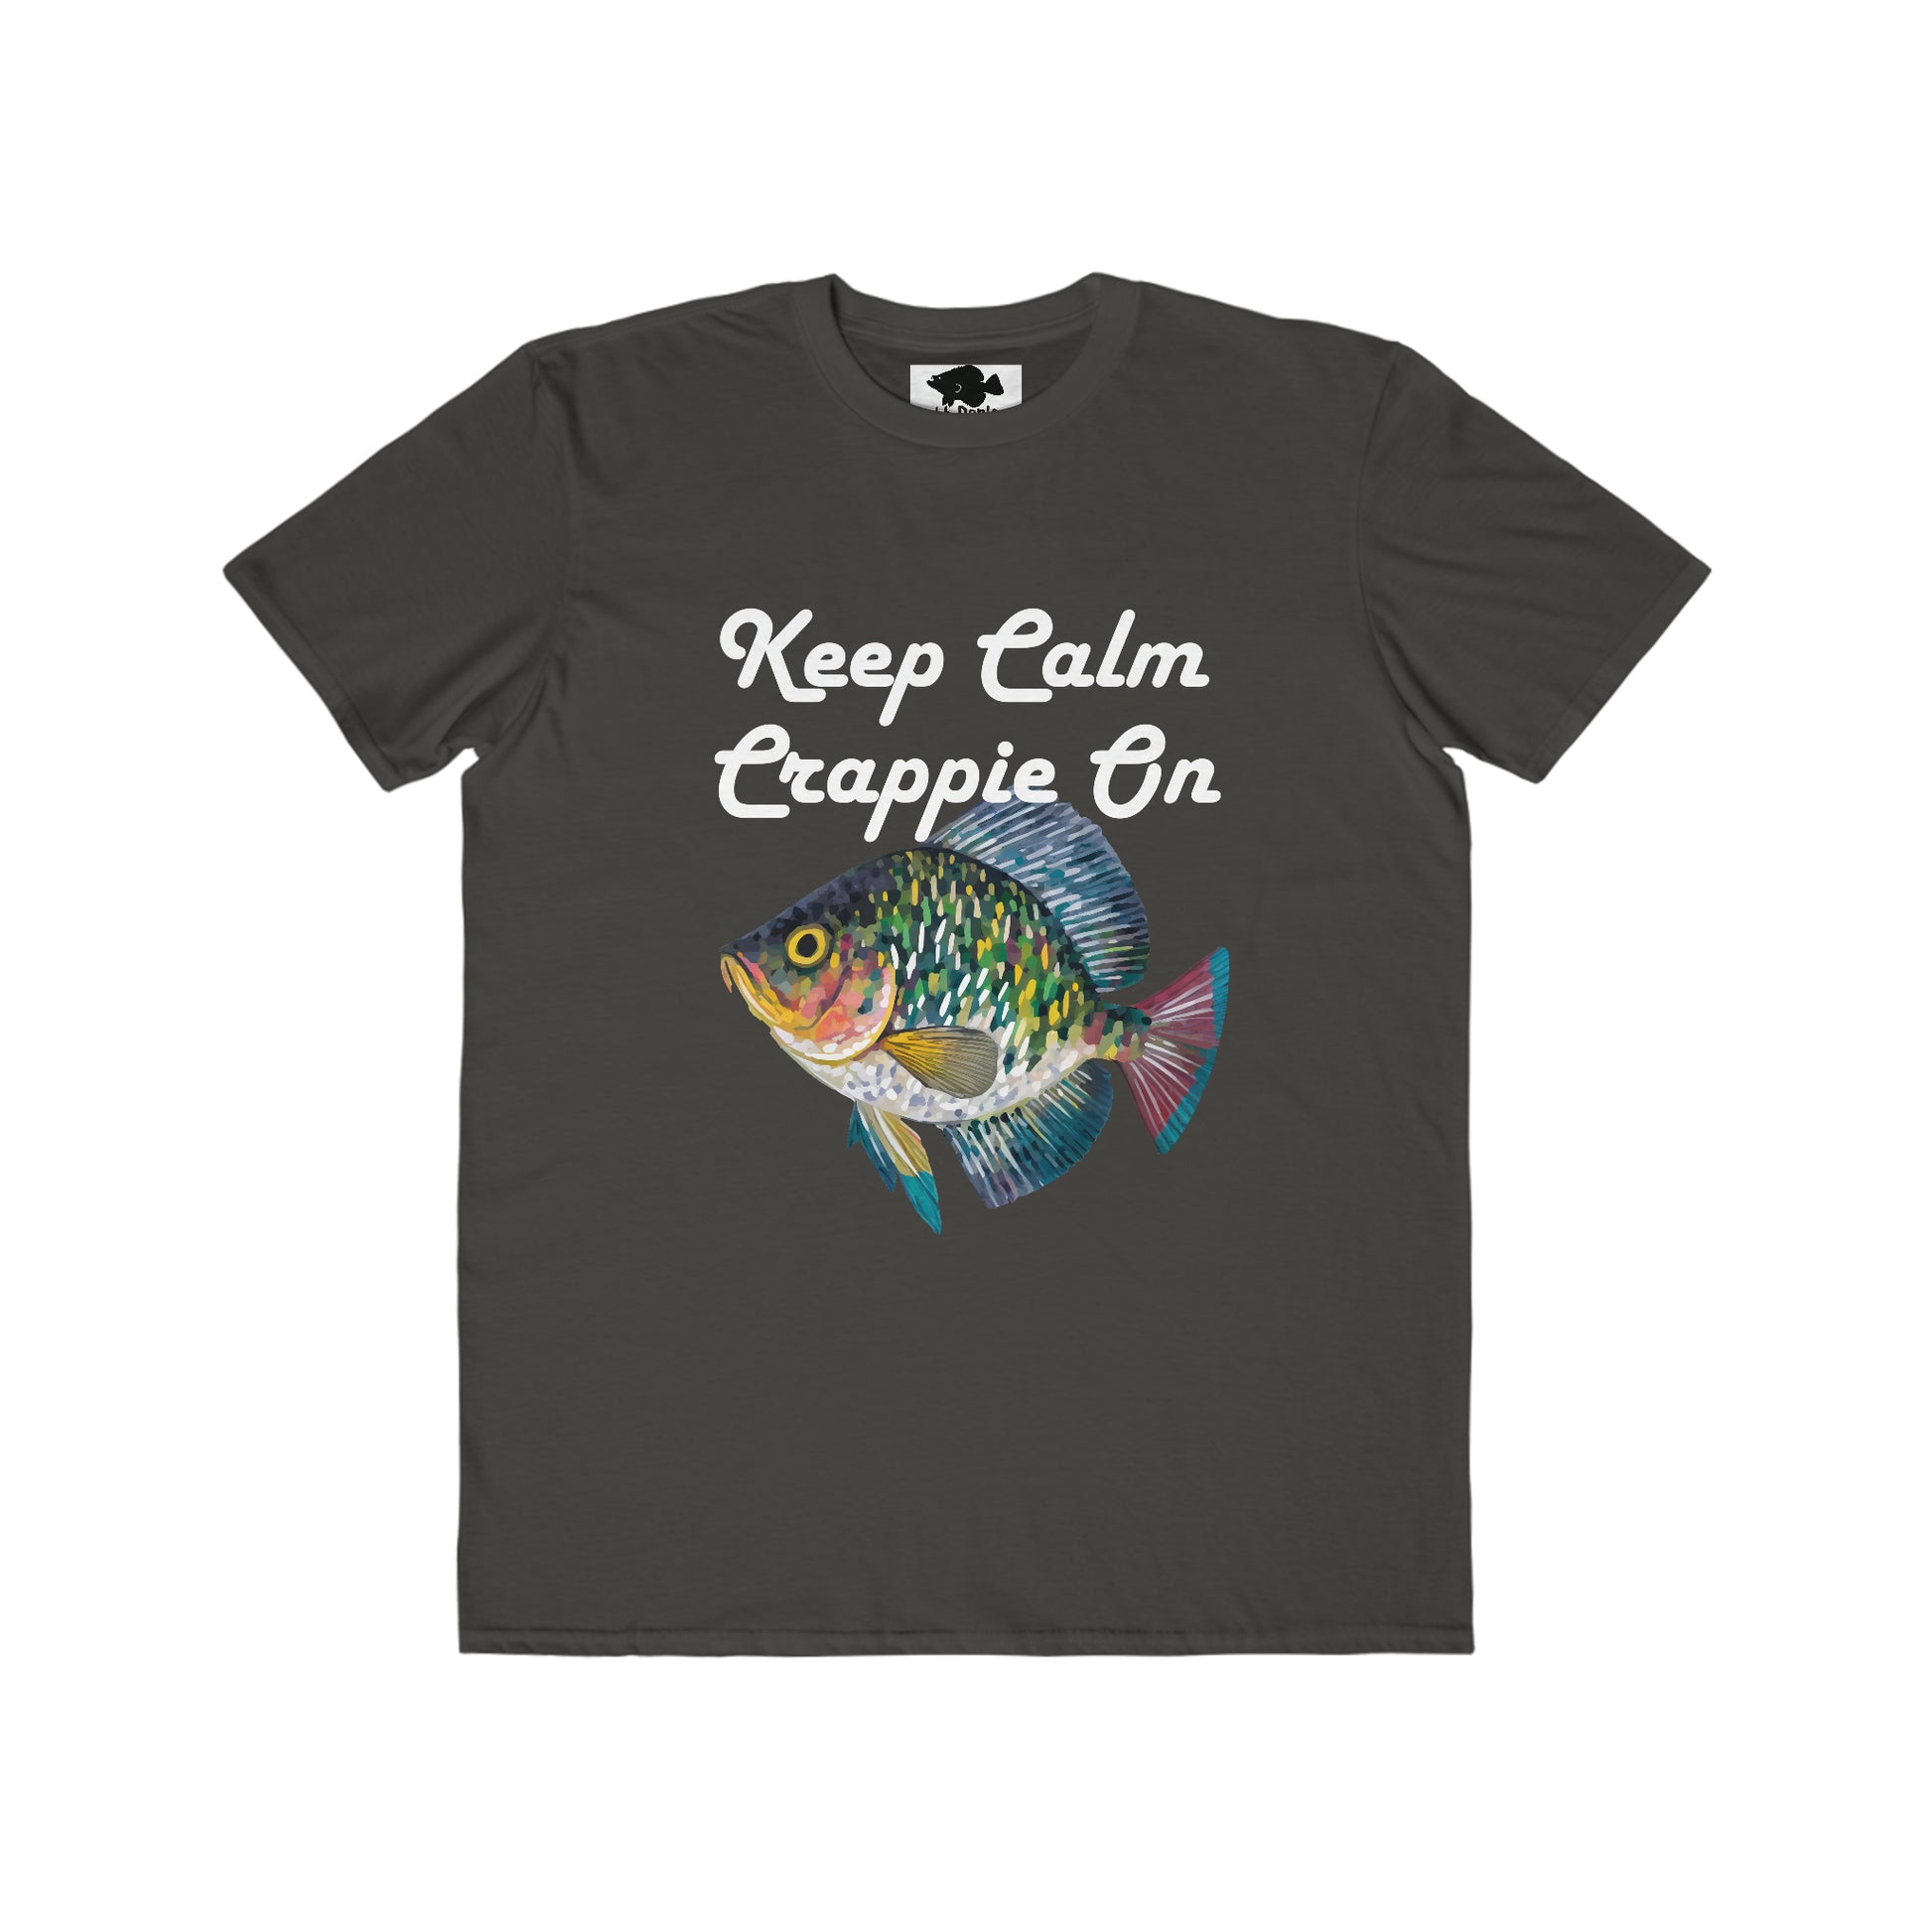 Crappie Fishing Apparel, Crappie Shirt, Keep Calm Crappie On